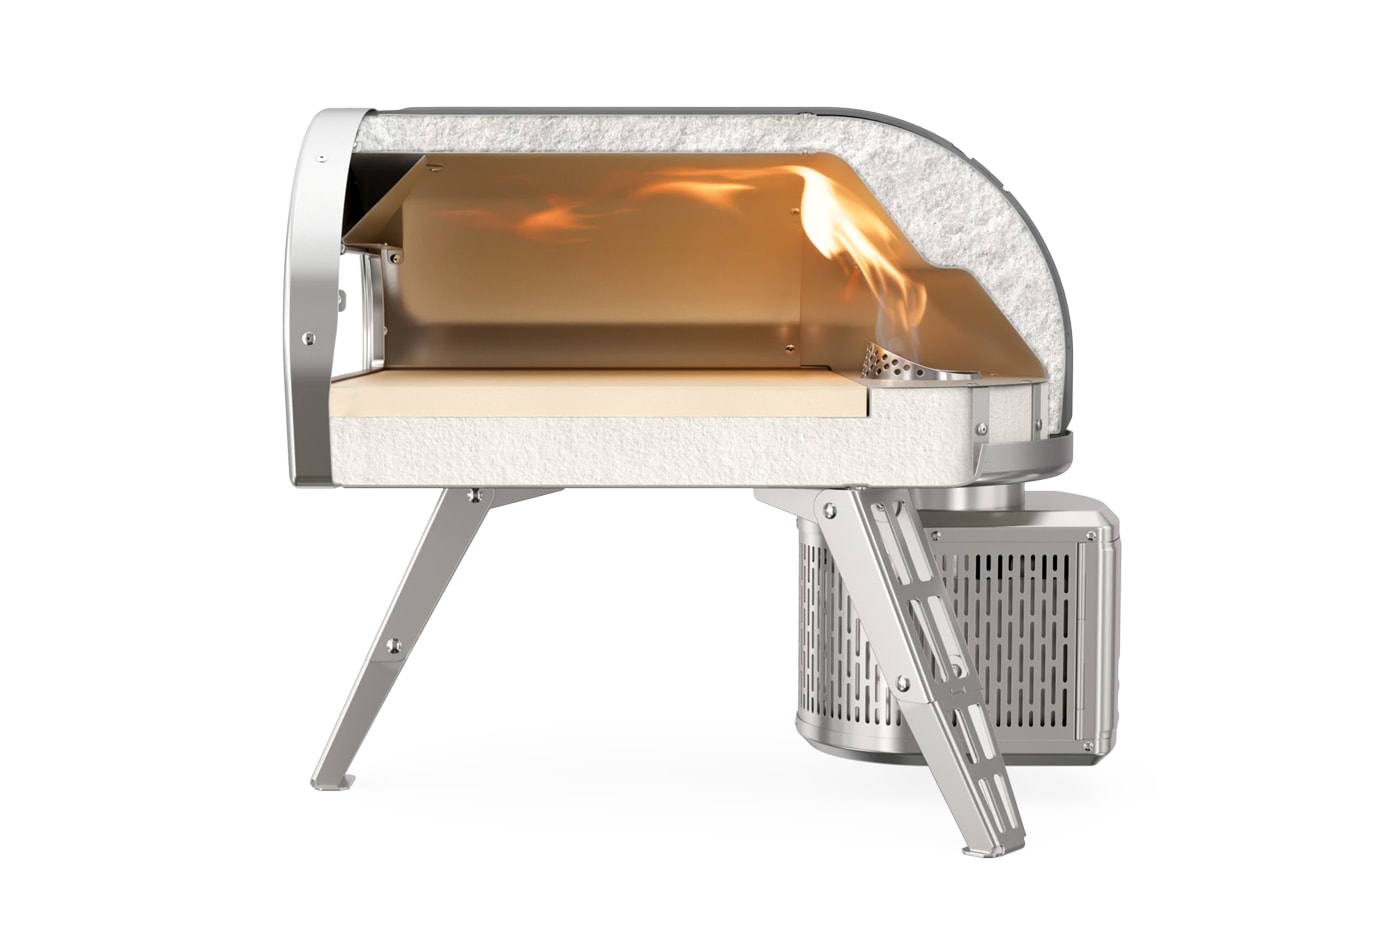 Gozney Wood Burner 2.0 Roccbox Portable Pizza Oven Neapolitan pizza wood burner cooking camping oven 